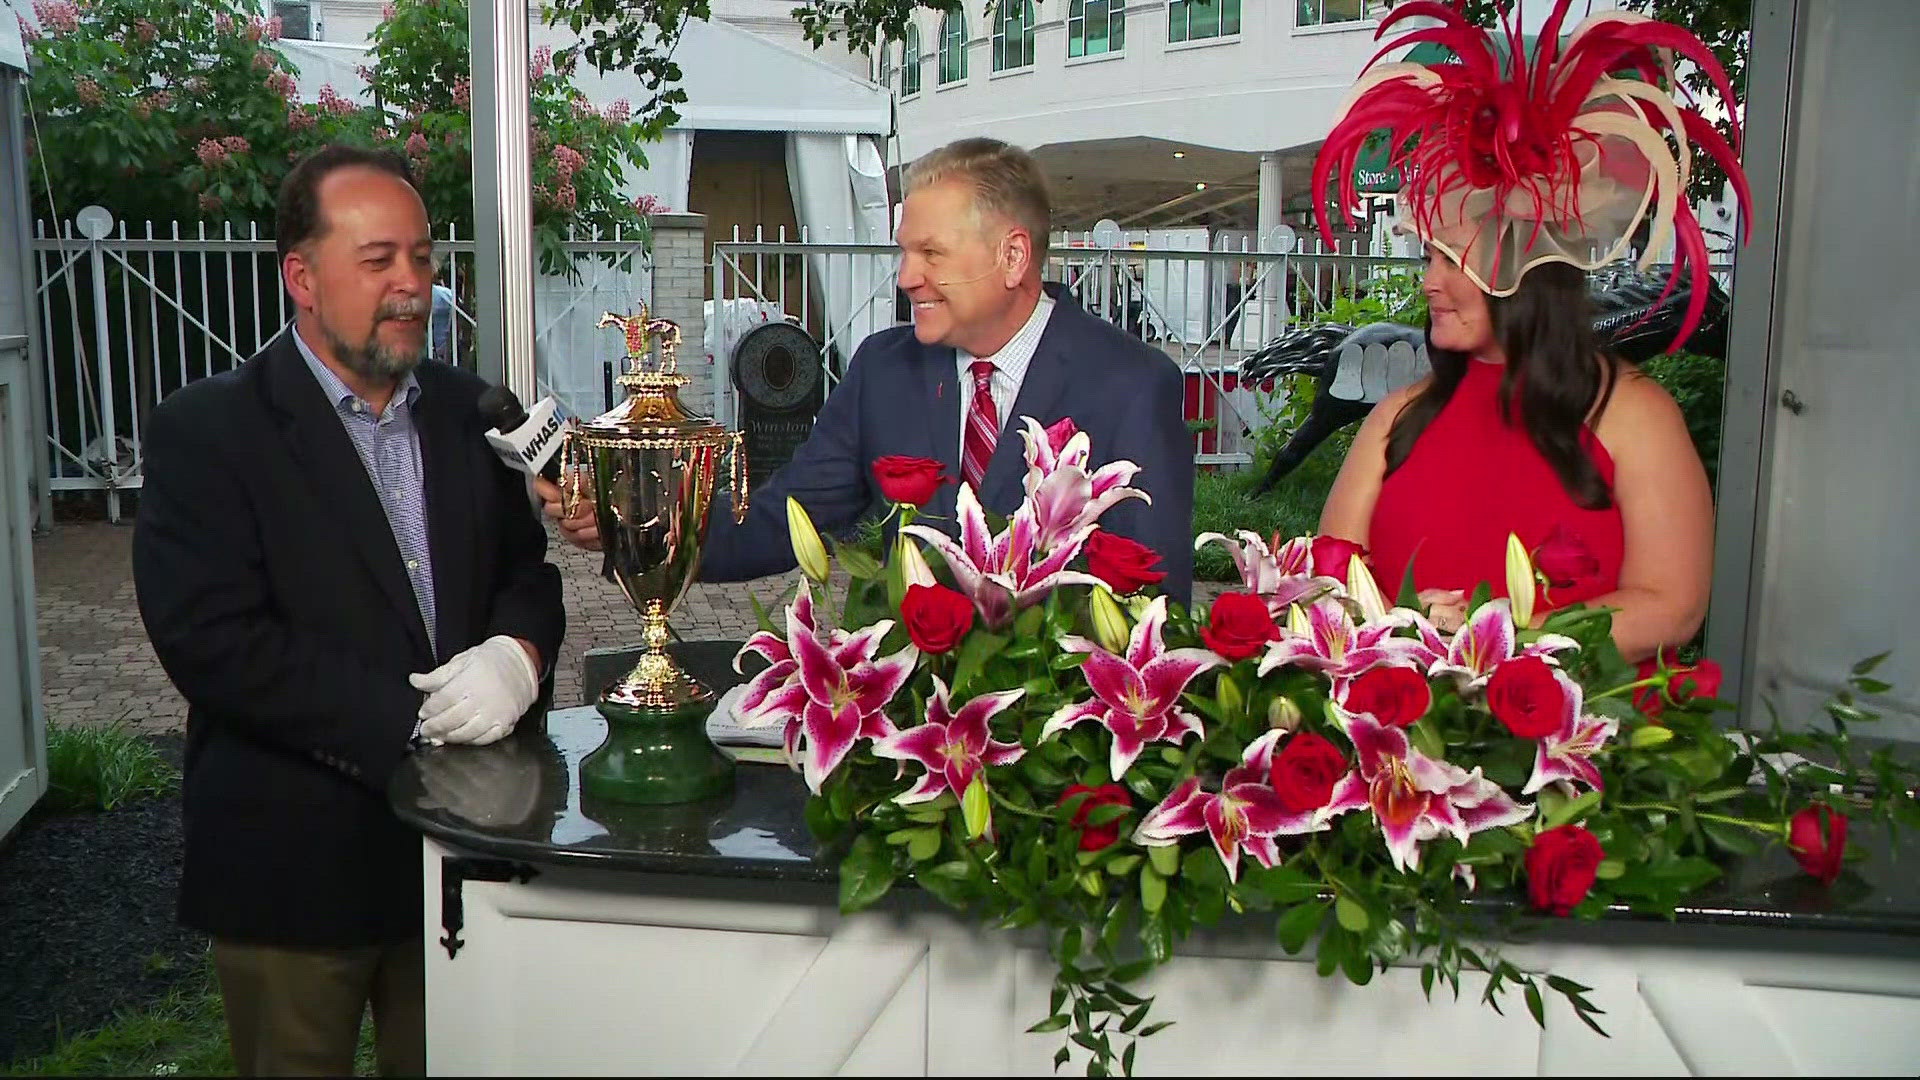 The iconic trophy has special touches added to honor the 150th Kentucky Derby.